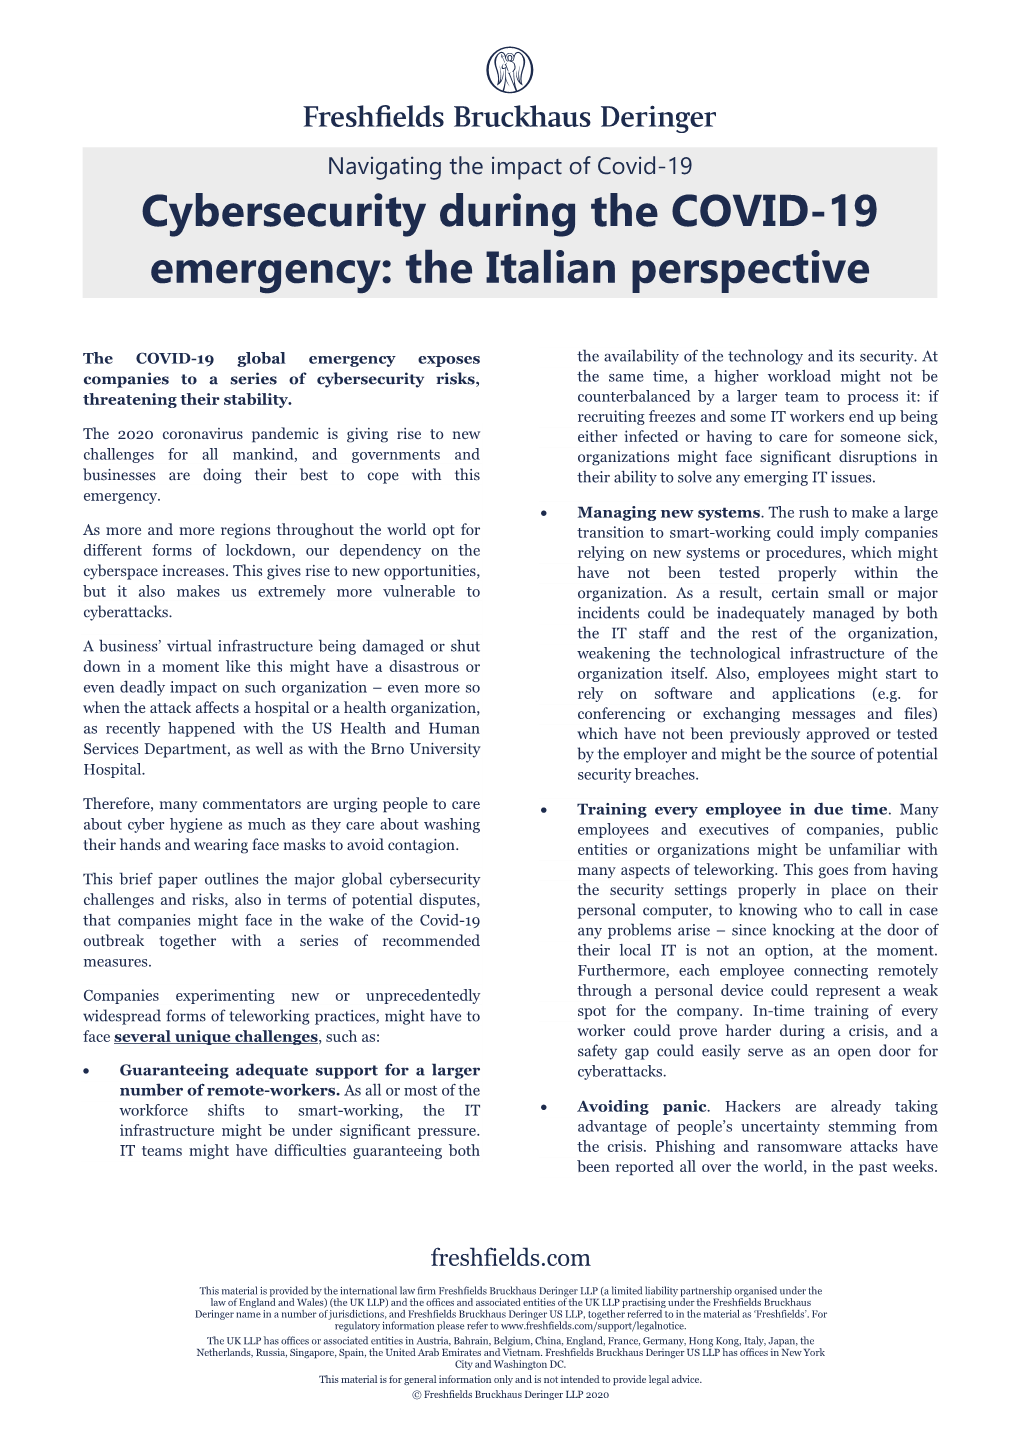 Cybersecurity During the COVID-19 Emergency: the Italian Perspective